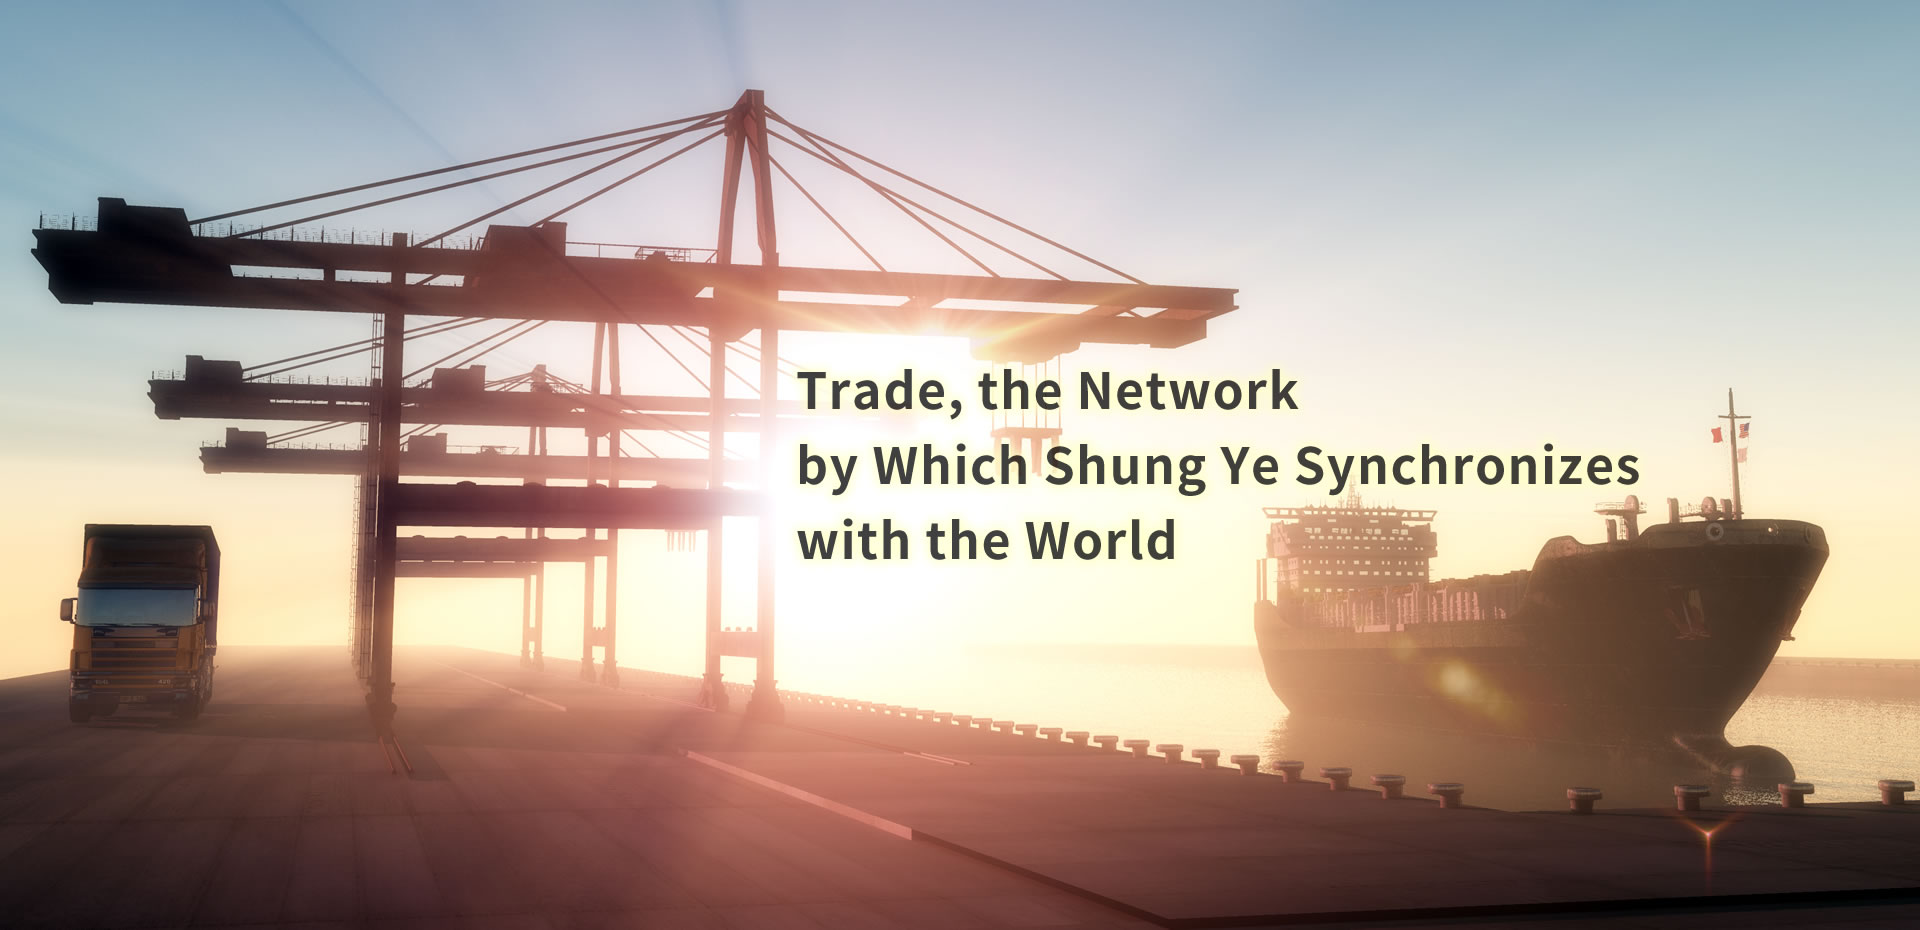 Trade, the Network by Which Shung Ye Synchronizes with the World